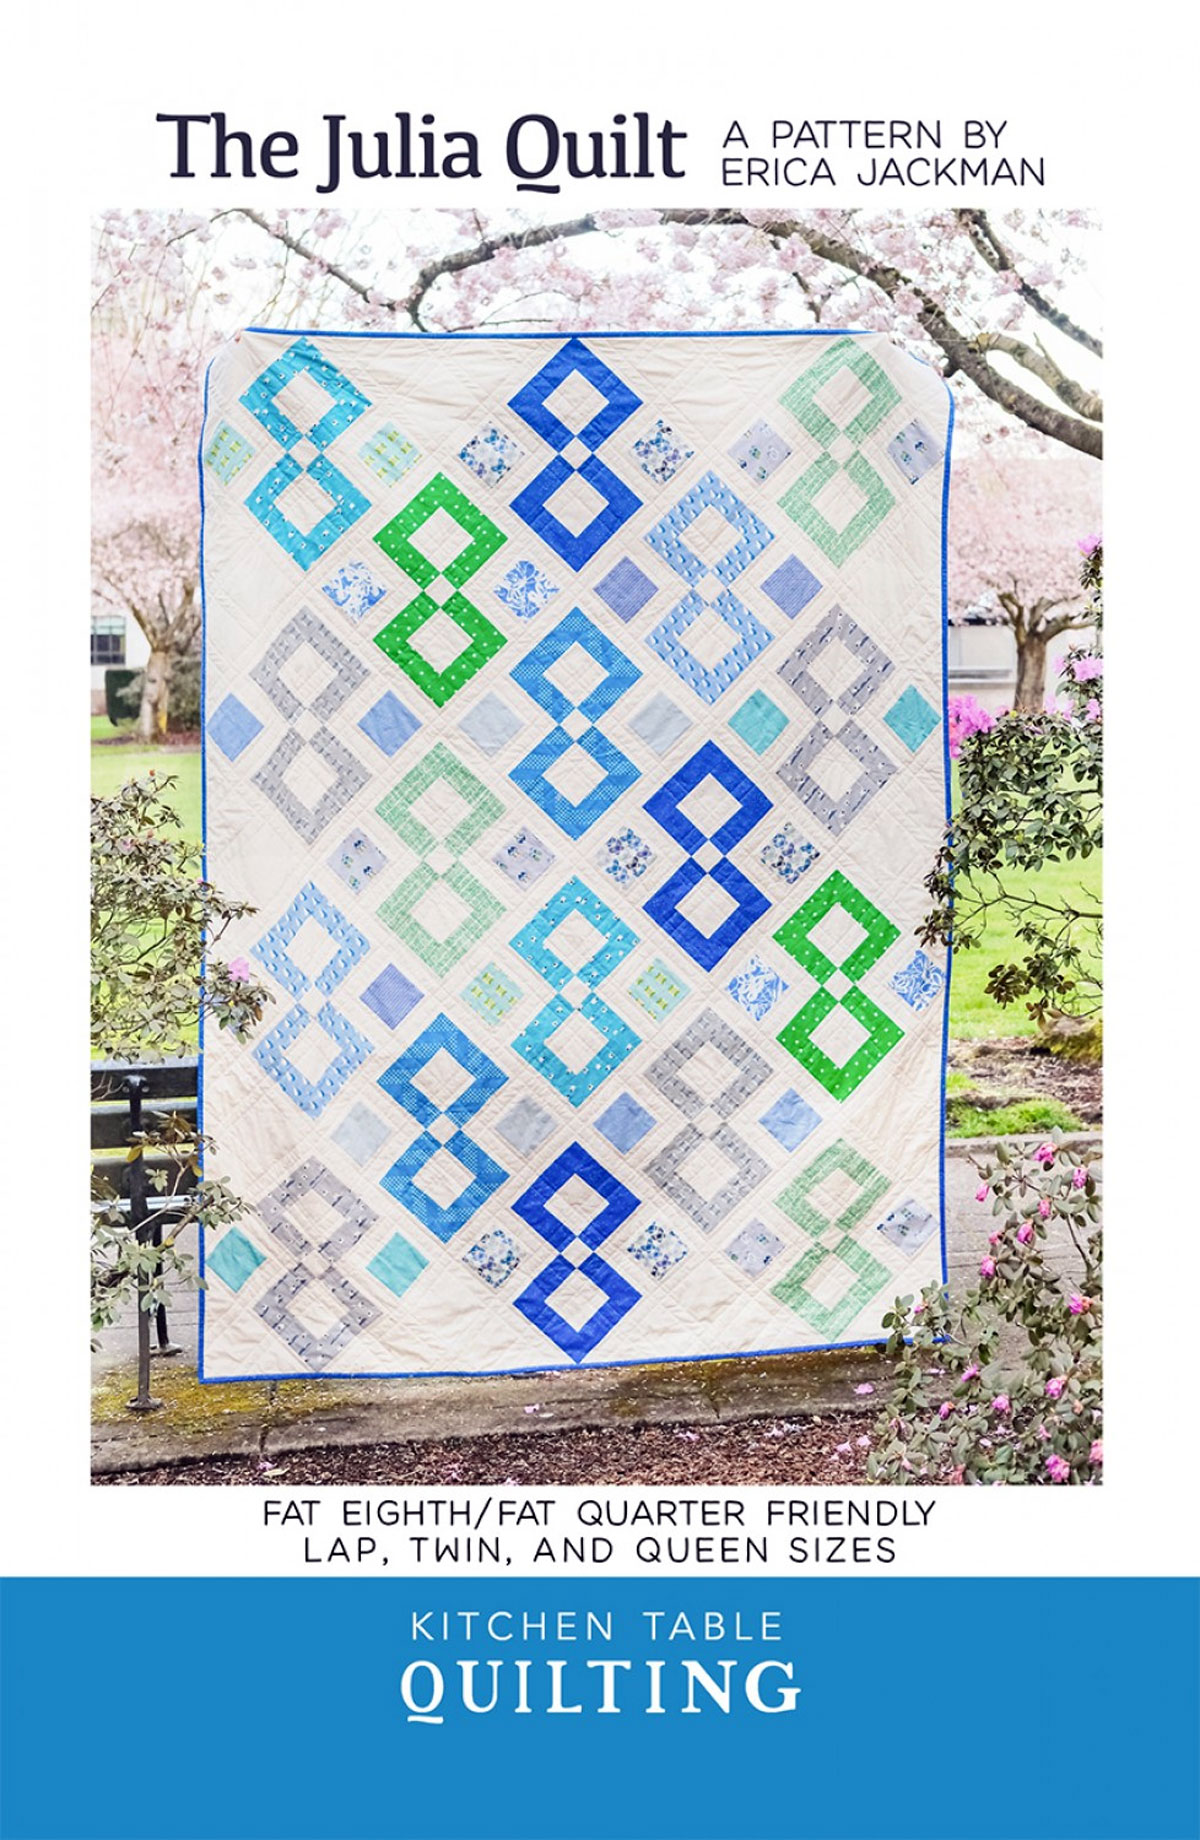 The-Julia-quilt-sewing-pattern-Kitchen-Table-Quilting-Erica-Jackman-front